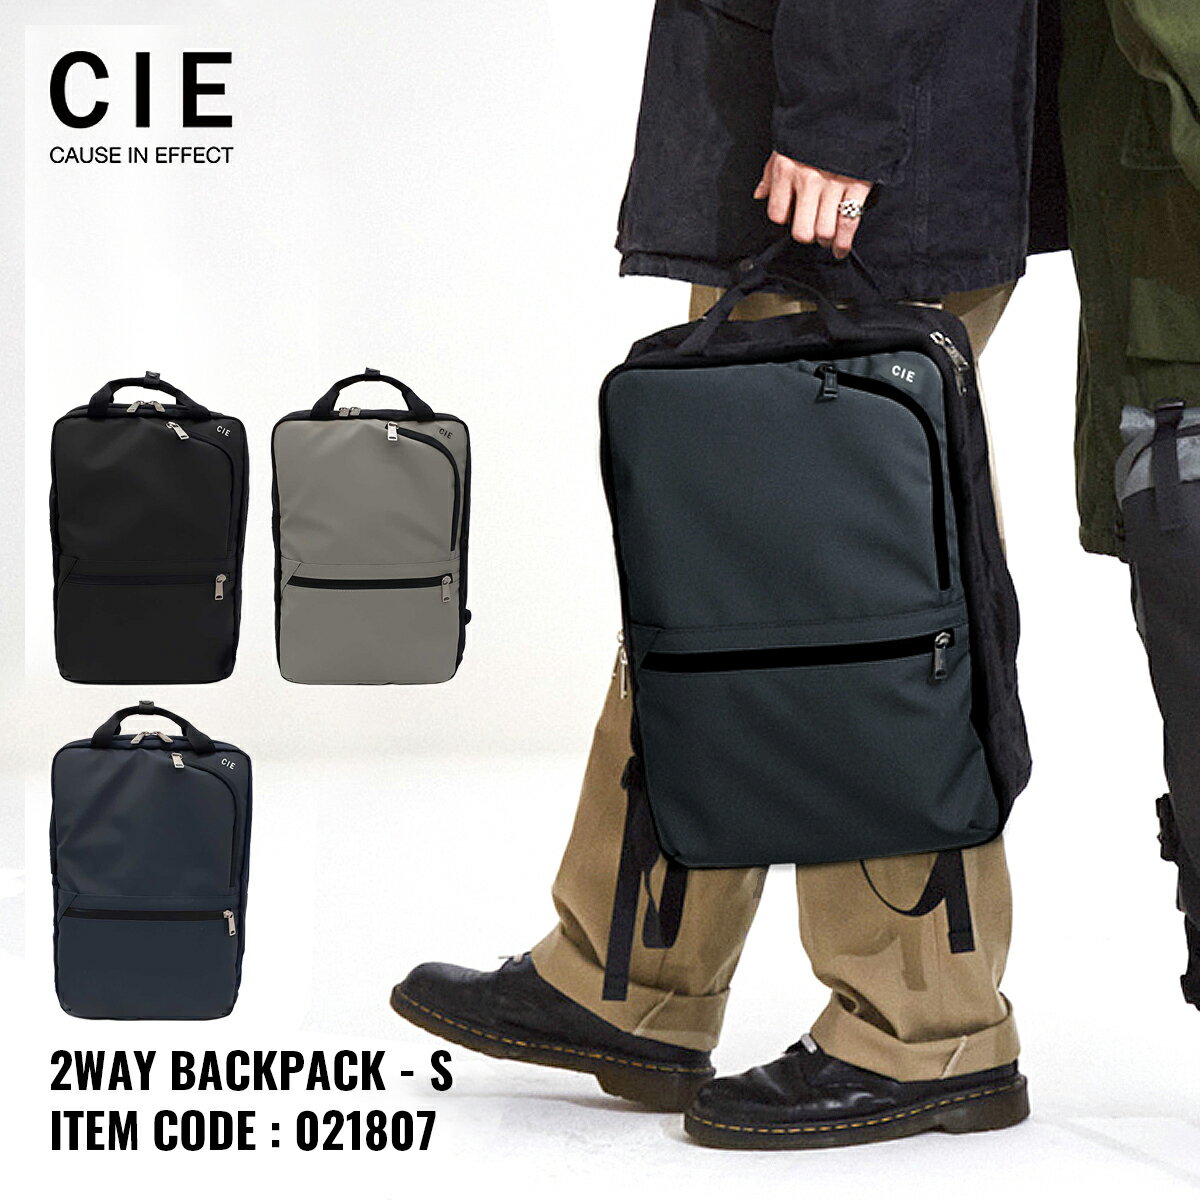 CIE リュック VARIOUS 2WAYBACKPACK S メンズ レディース 021807 シー ヴァリアス | バックパック リュックサック ナイロン A4対応 防水 撥水 軽量 日本製